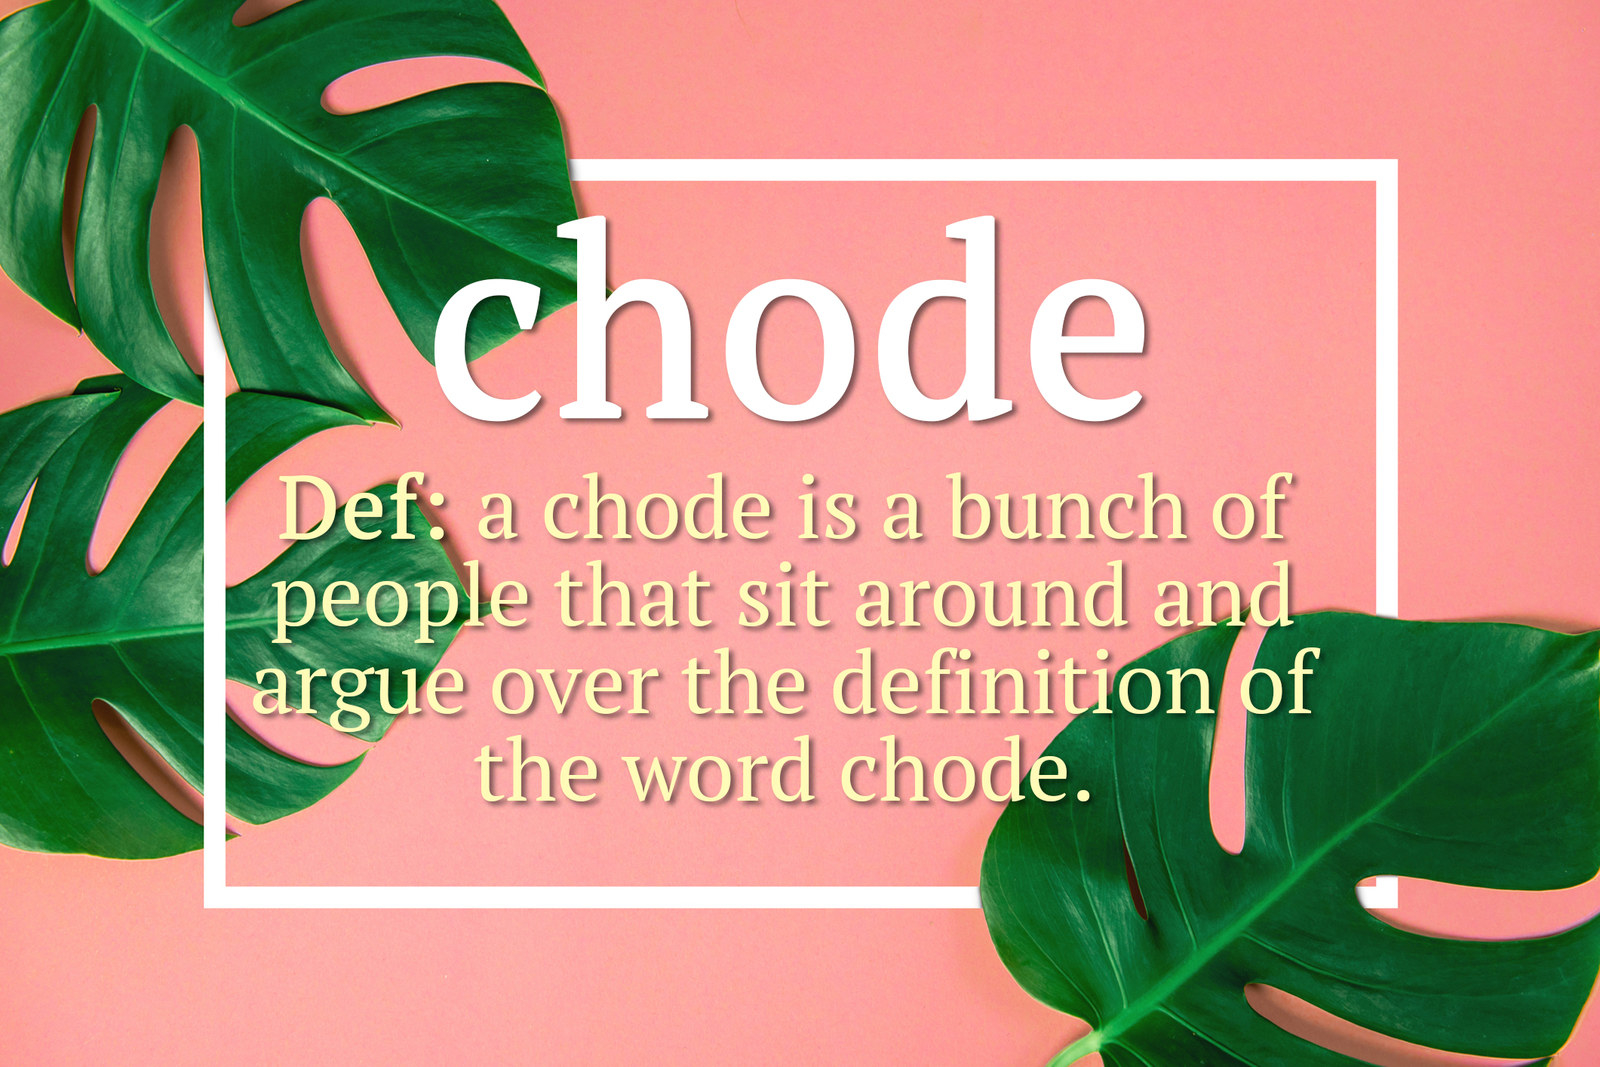 9 More Urban Dictionary Definitions You Need To Know 